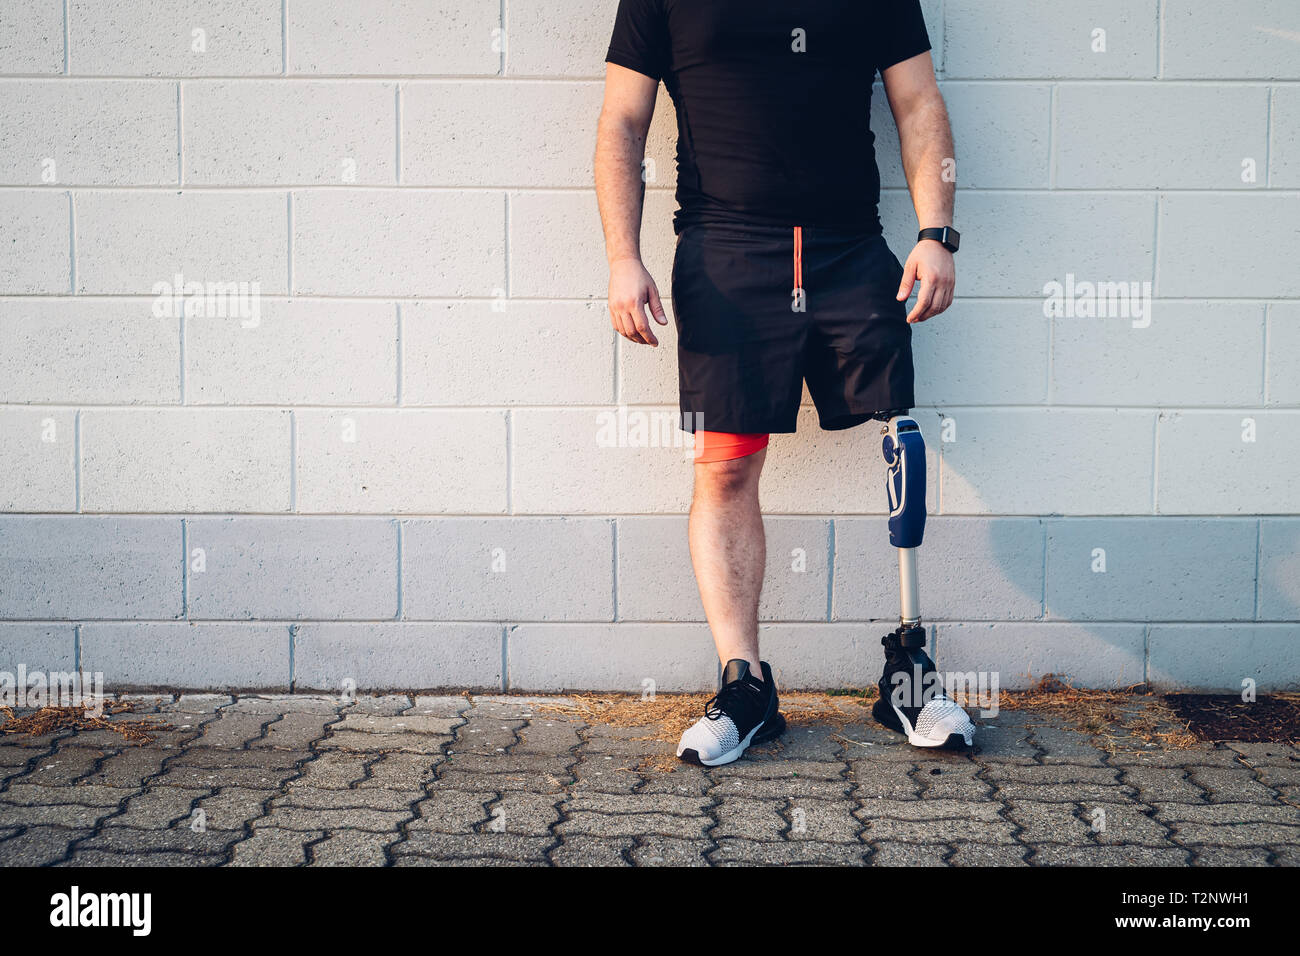 Man with prosthetic leg leaning on wall Stock Photo